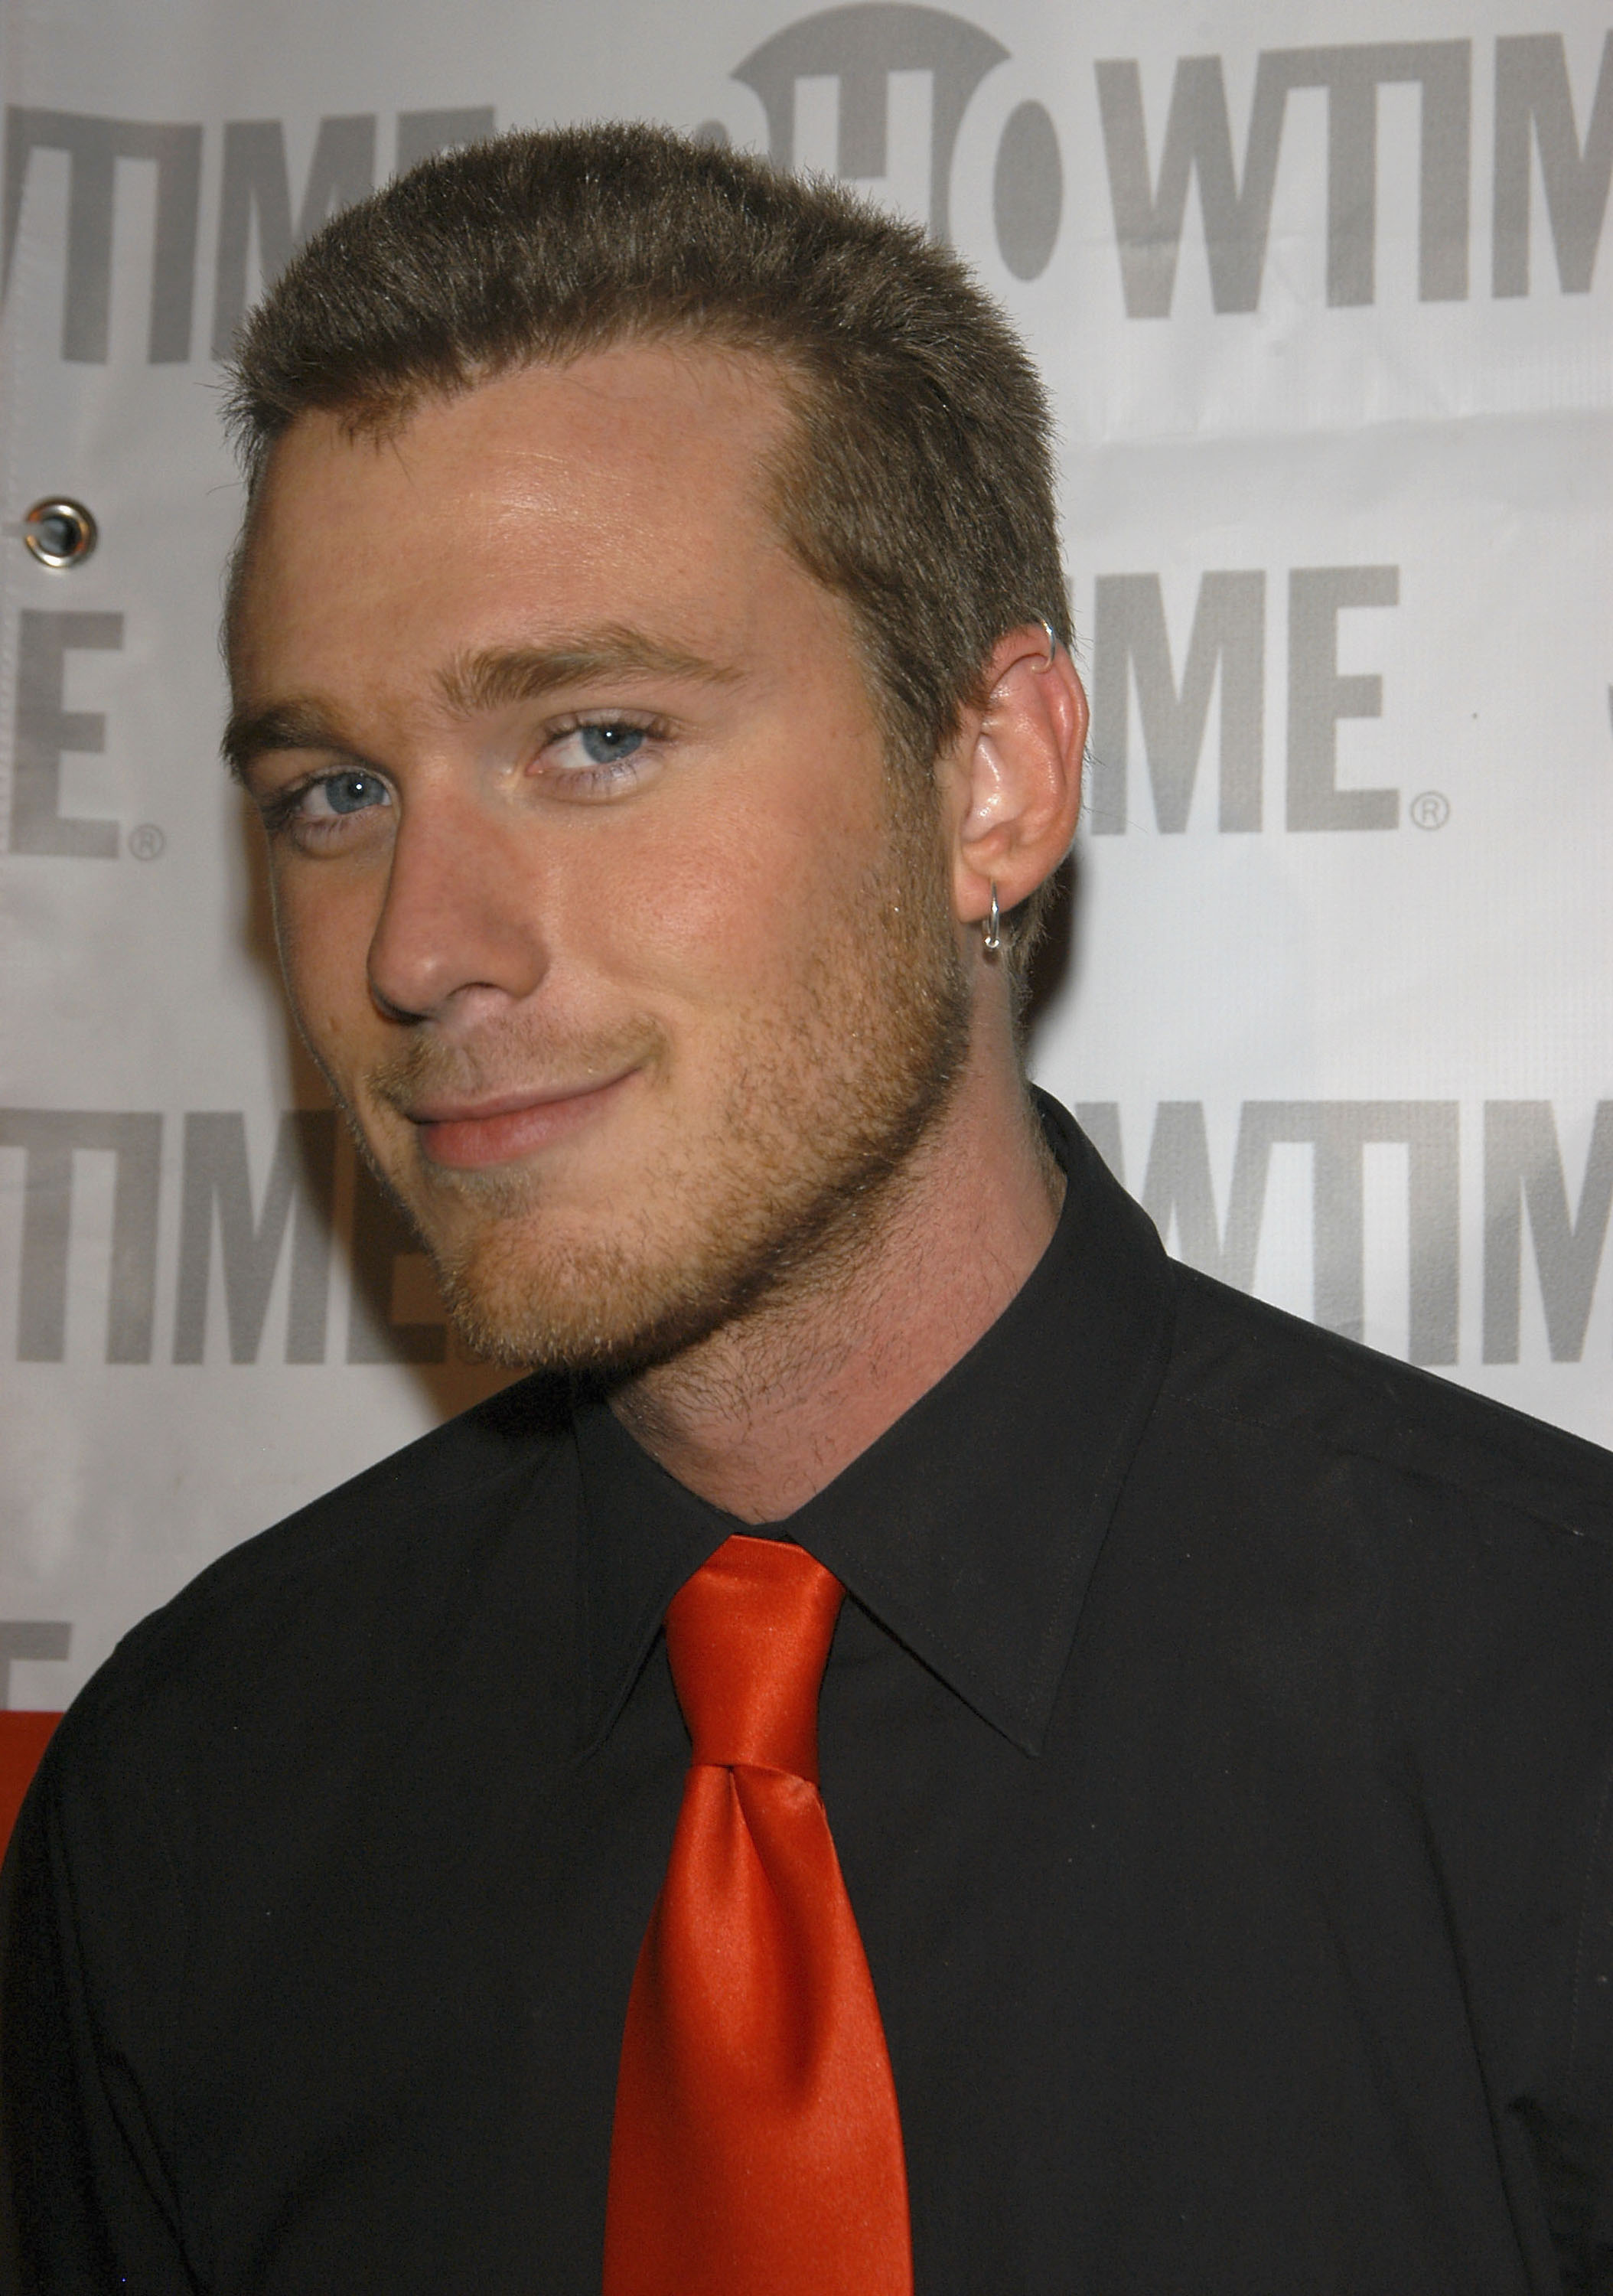 The 42-year old son of father Ernie Lively and mother Elaine Lively Eric Lively in 2024 photo. Eric Lively earned a  million dollar salary - leaving the net worth at 2 million in 2024